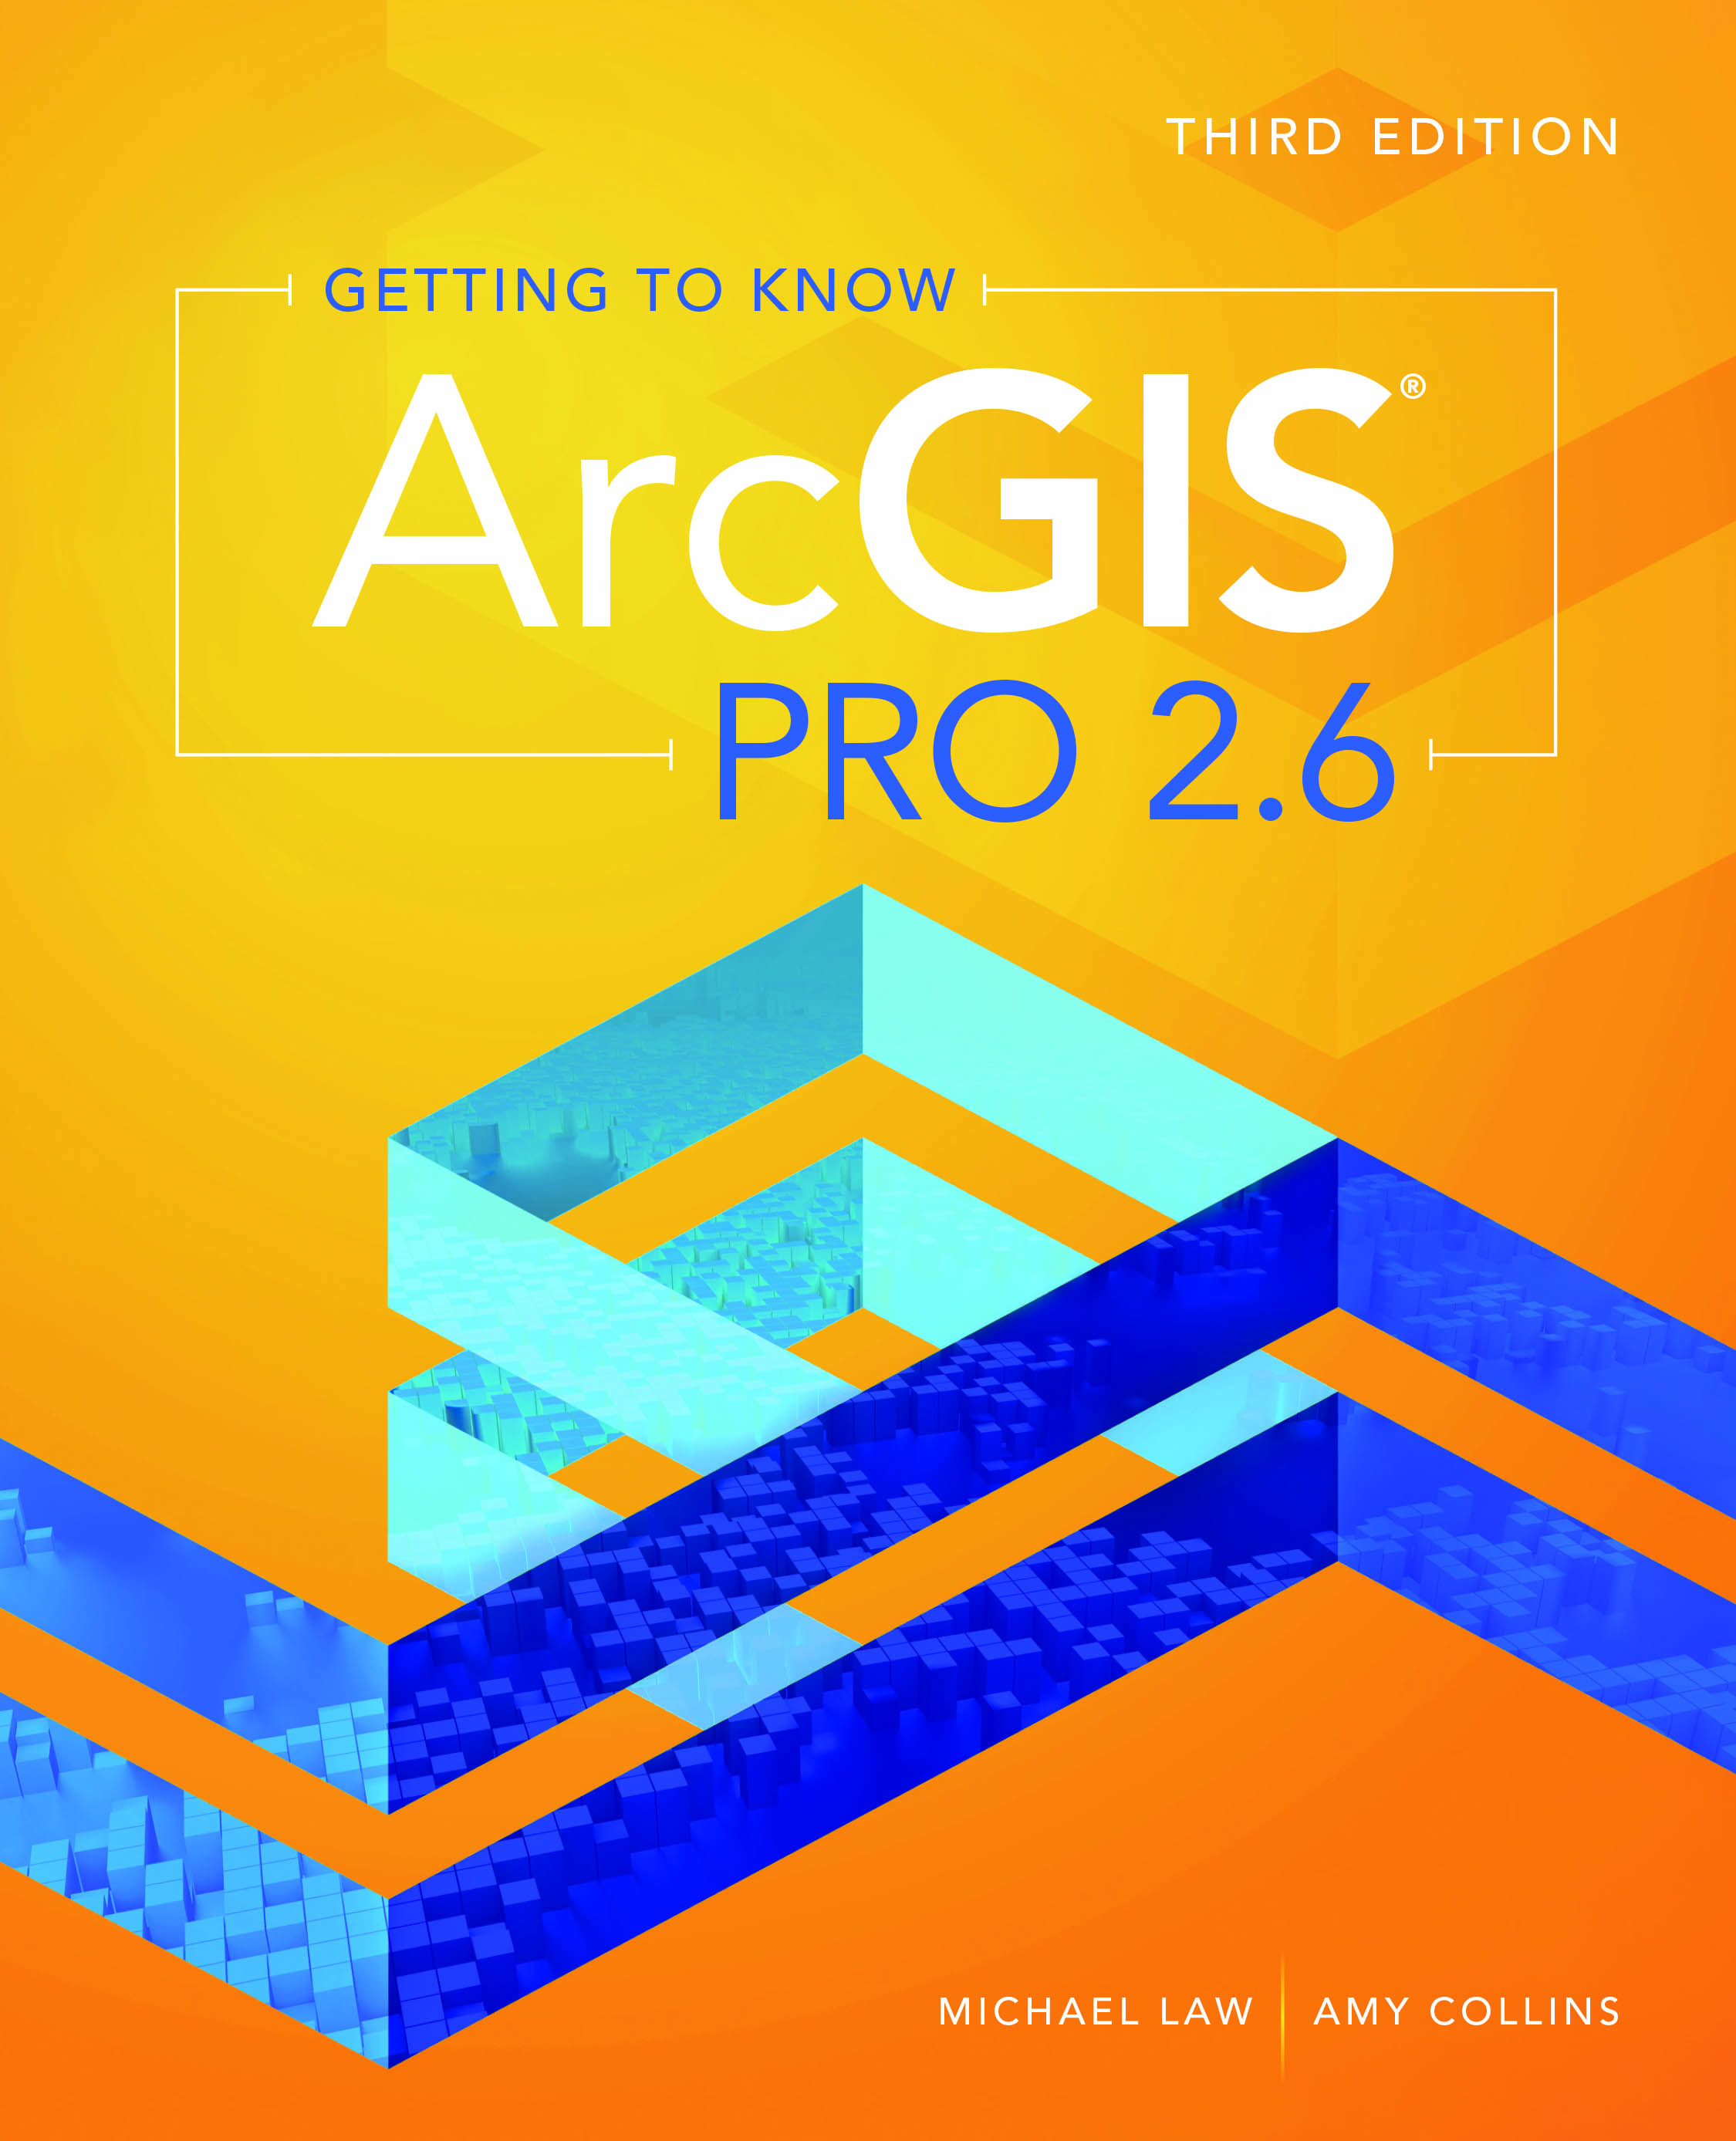 arcgis trial software download